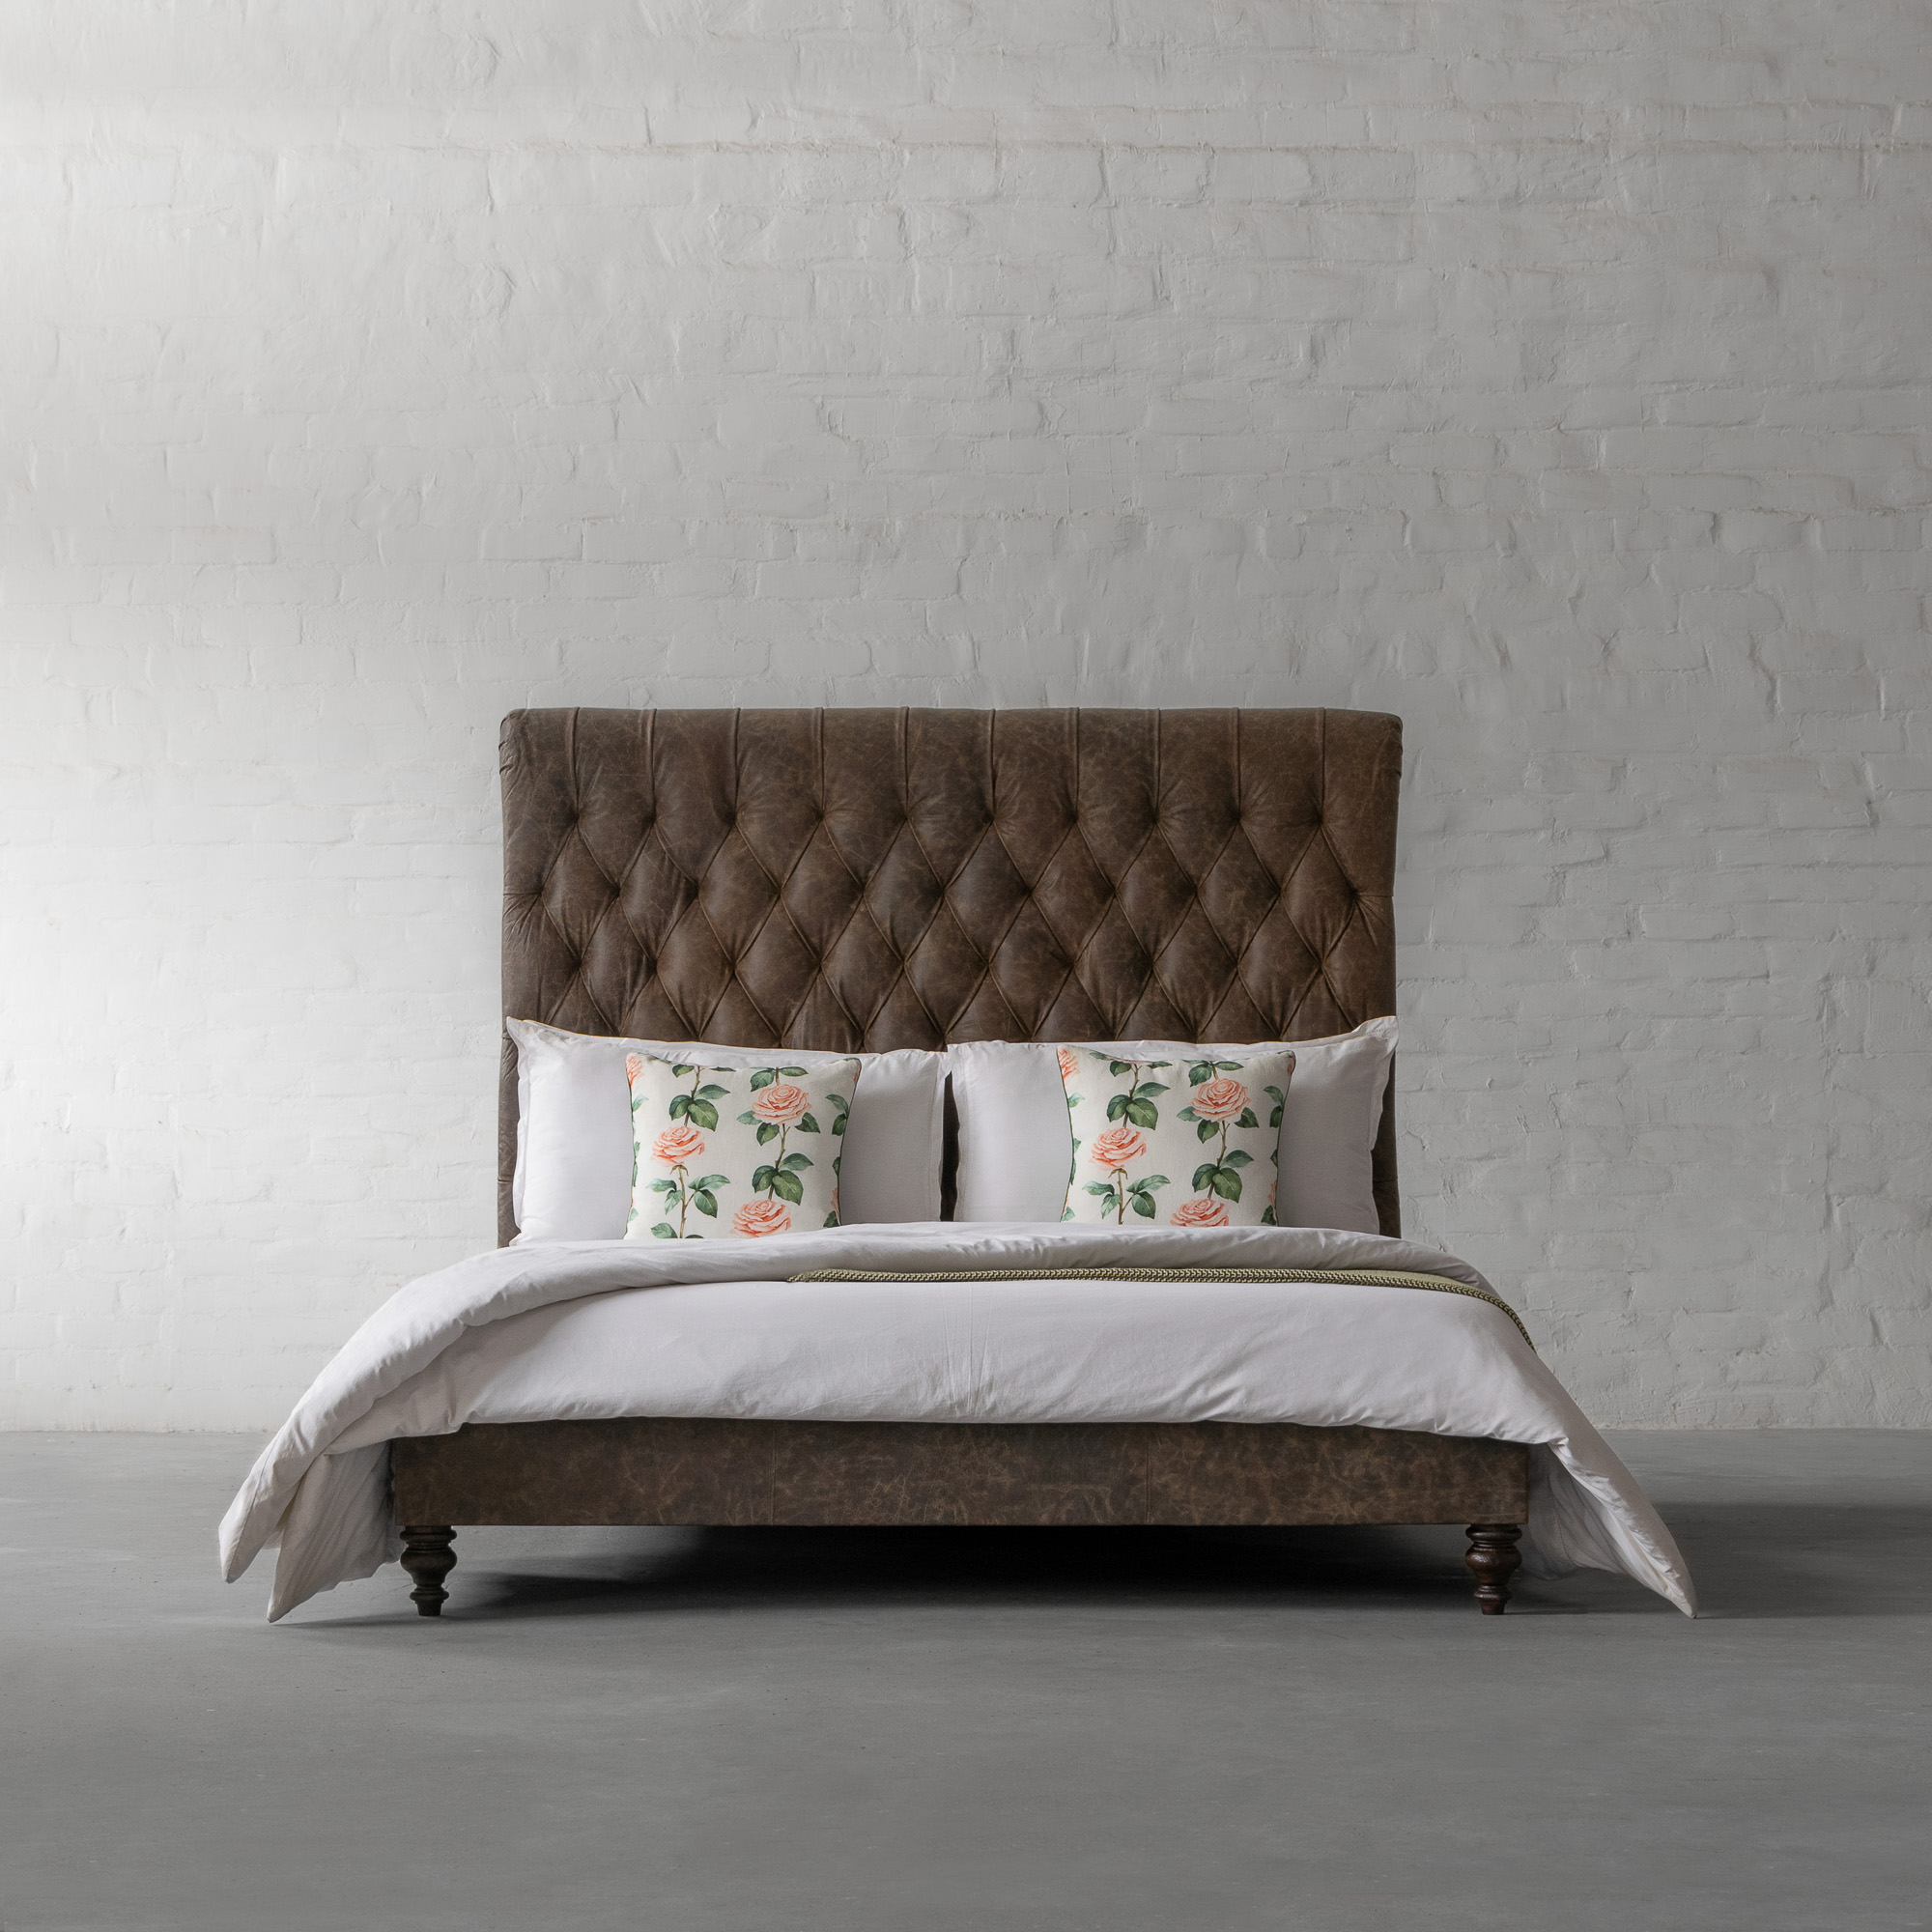 Chesterfield Leather Bed Collection, Chesterfield Leather Bed